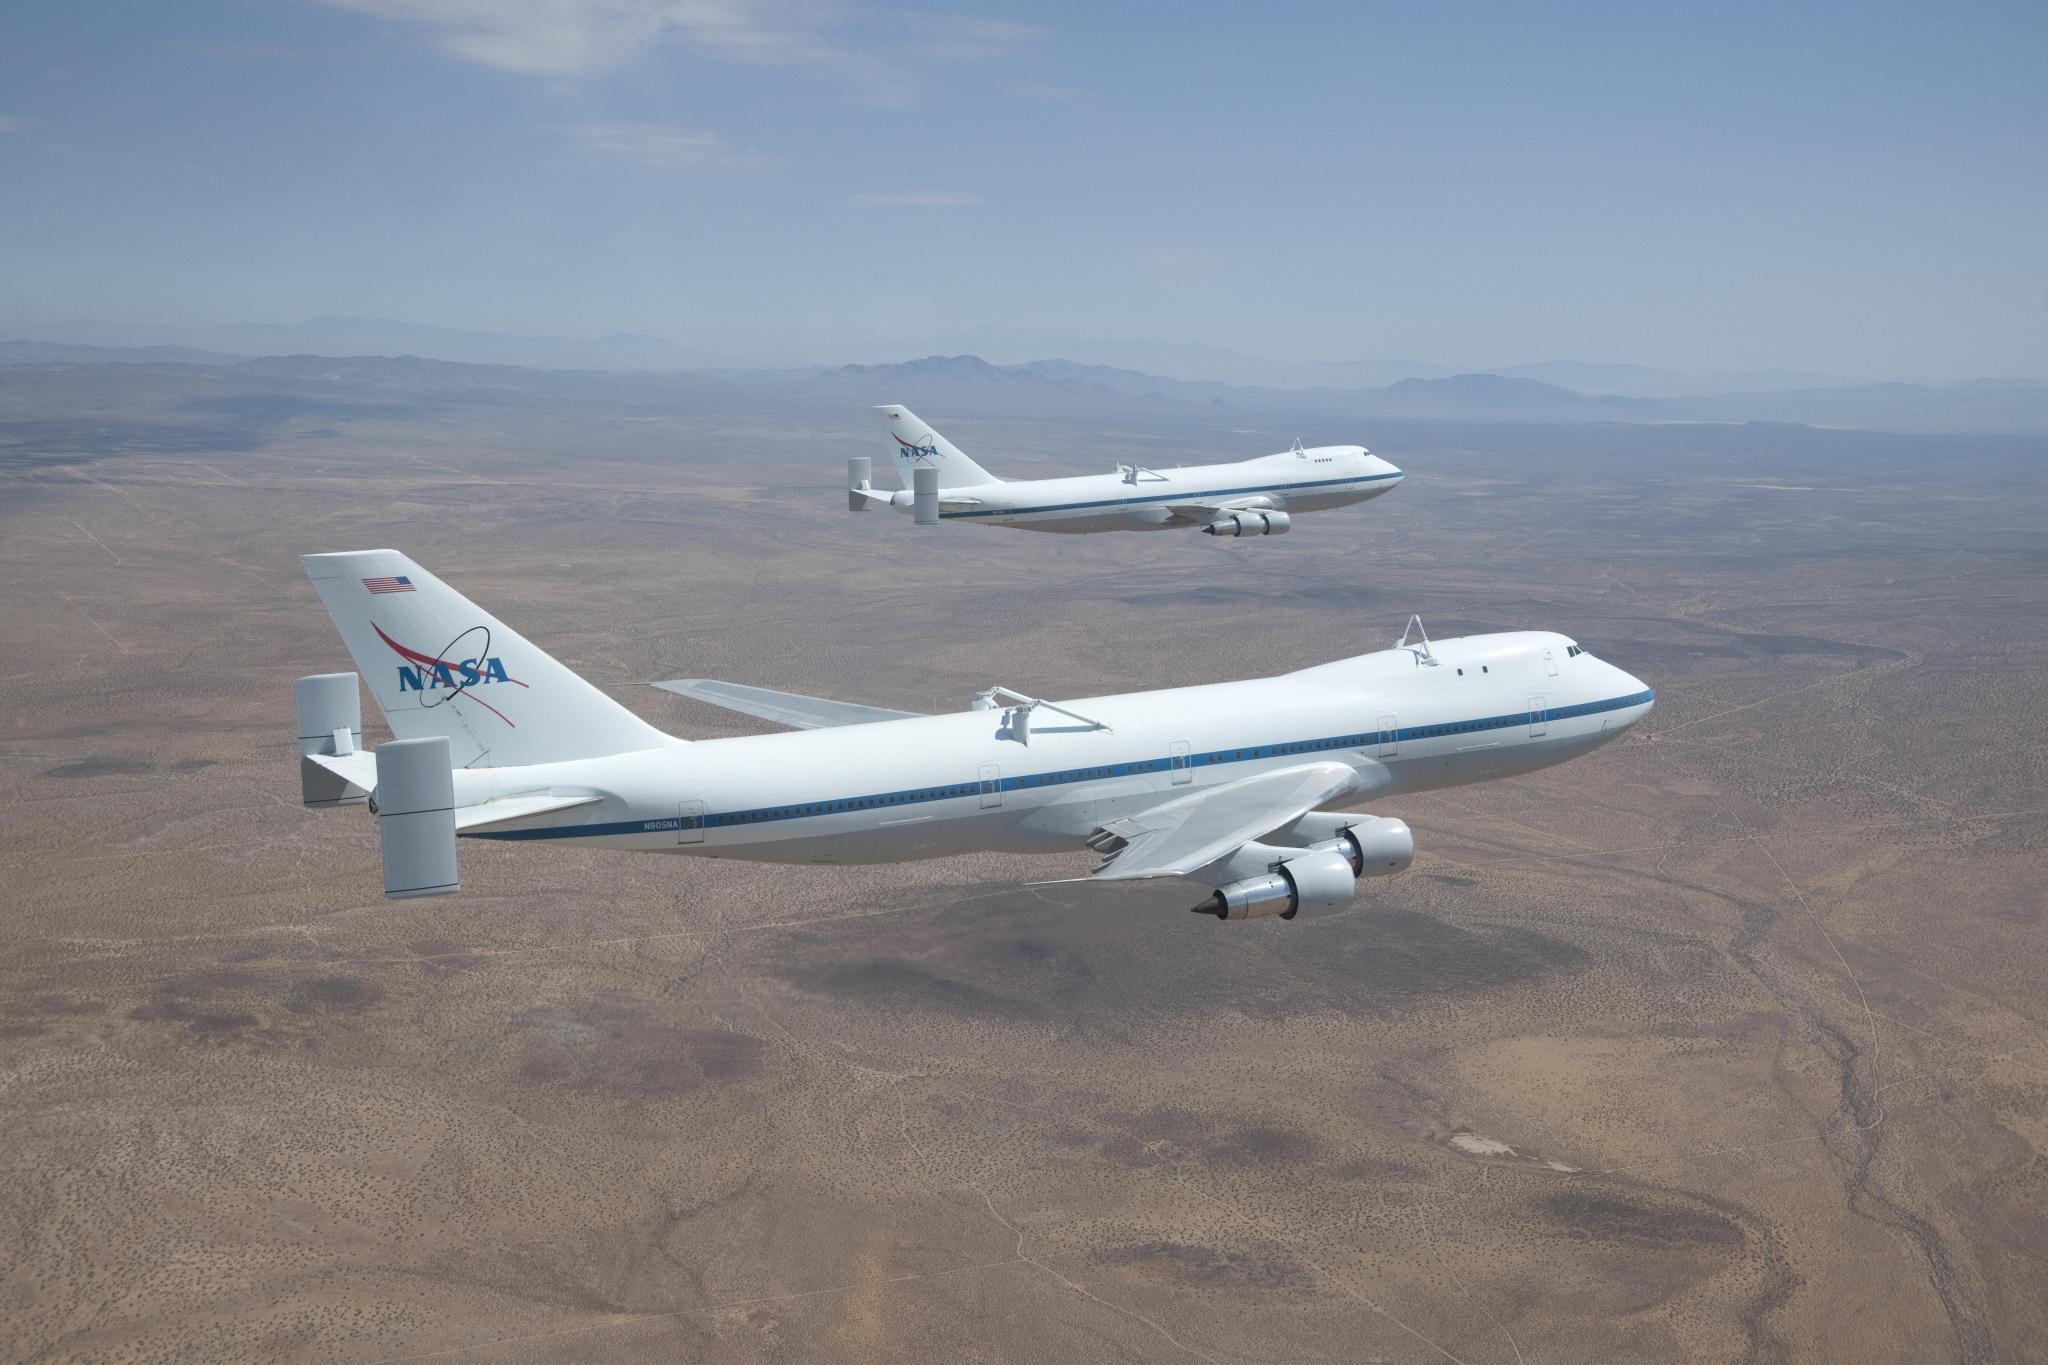 NASA's two 747 shuttle carrier aircraft fly in formation over the California desert near Edwards Air Force Base.